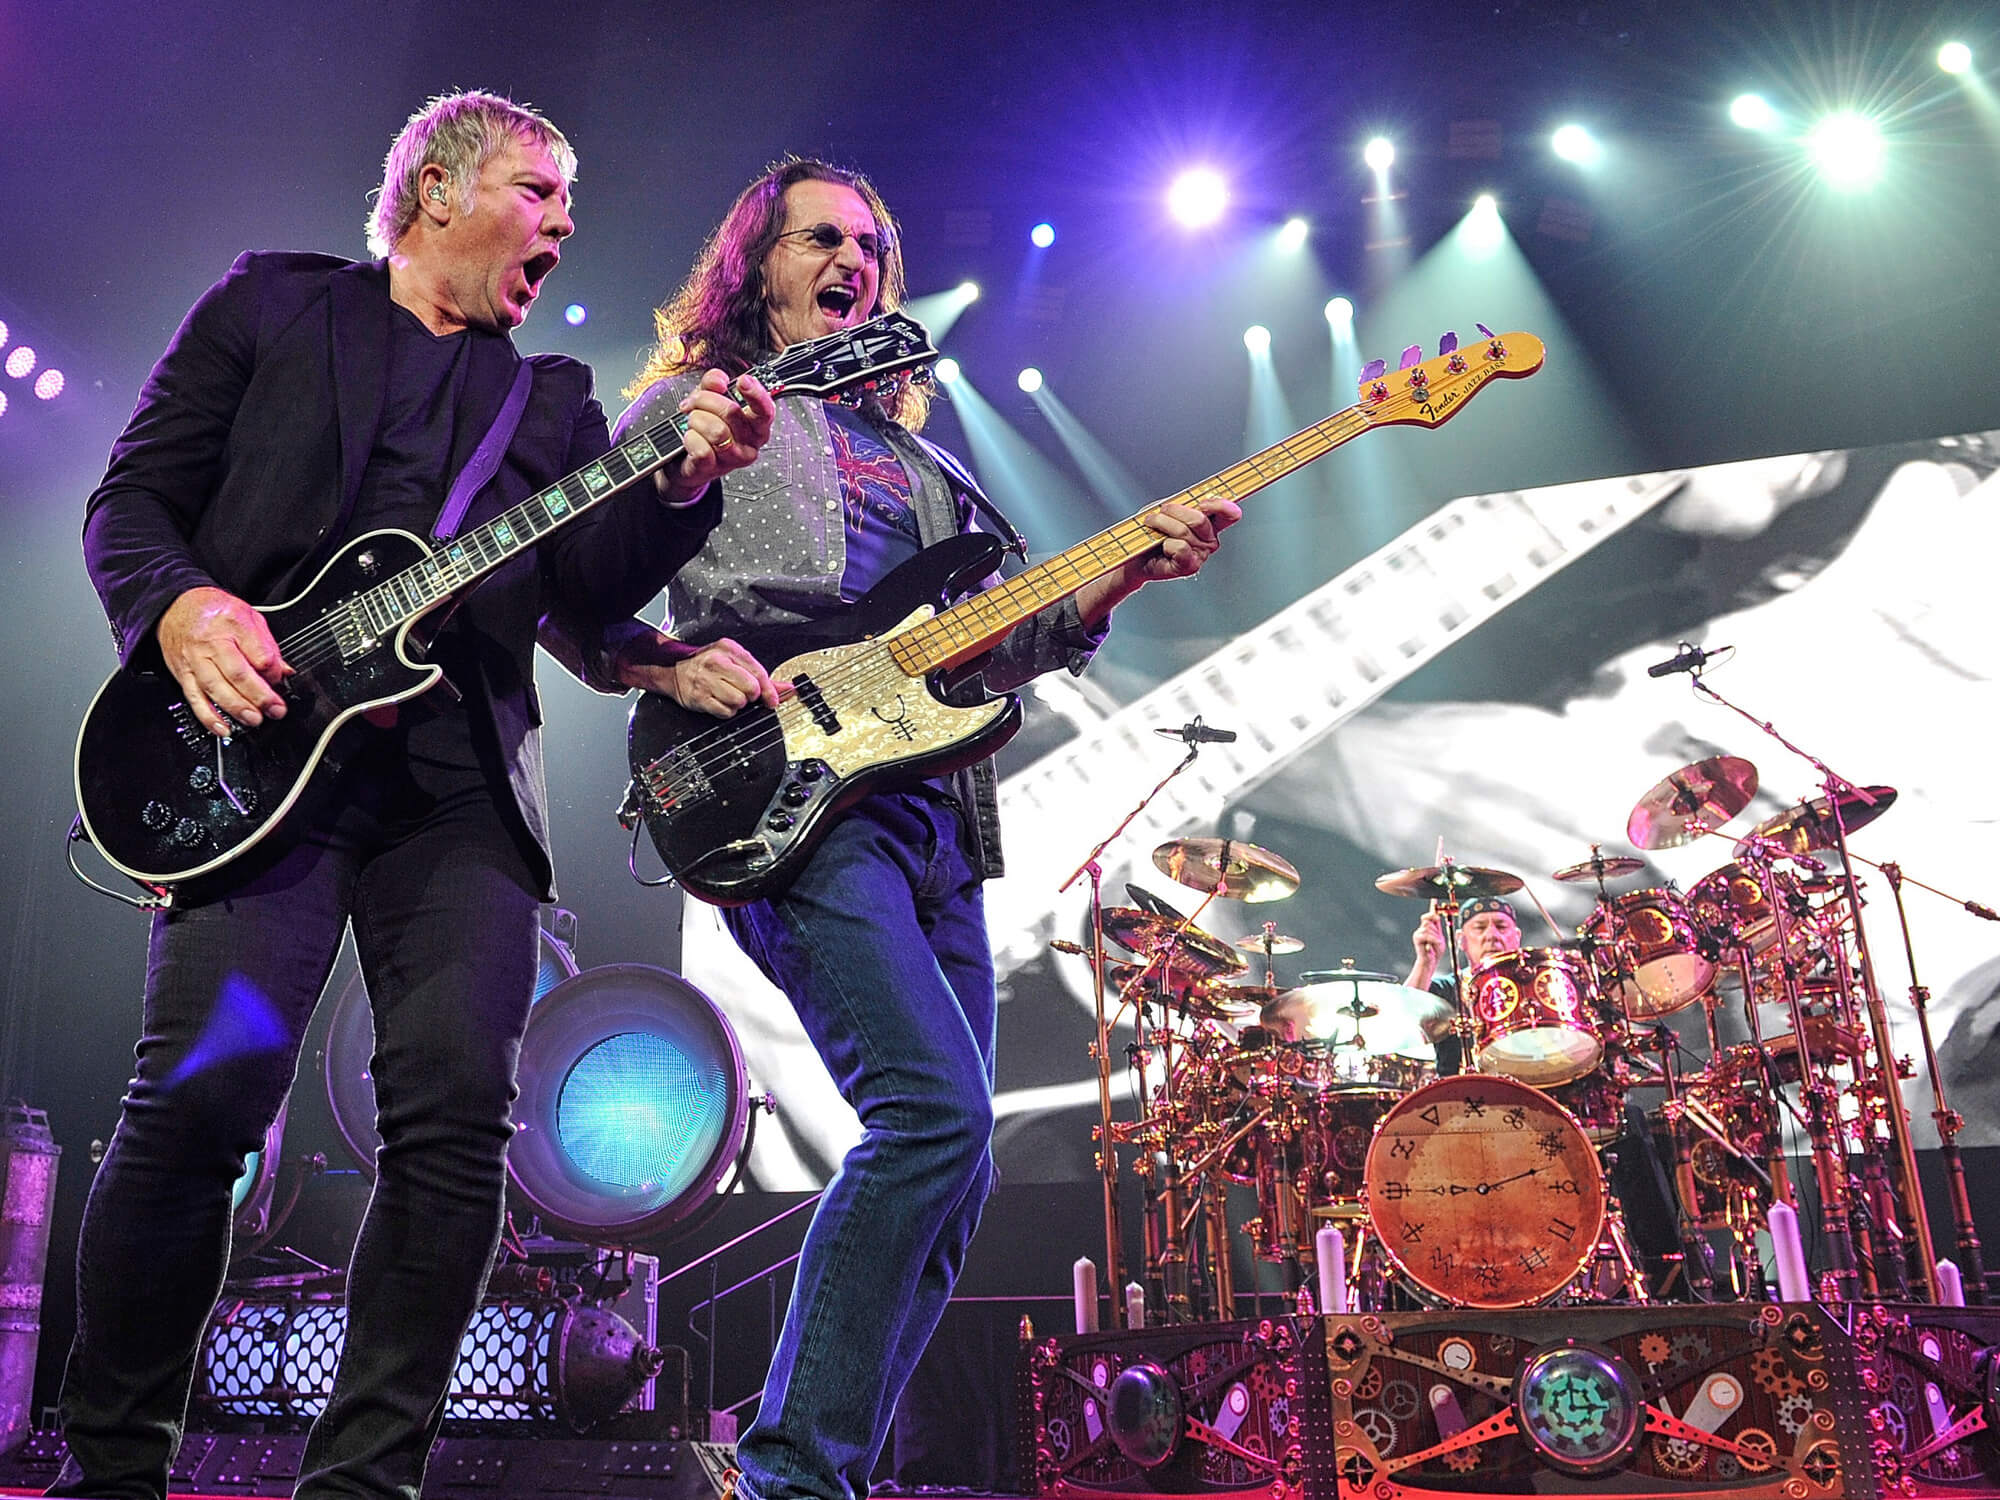 Guitarist Alex Lifeson, bassist Geddy Lee, and drummer Neil Peart of Rush